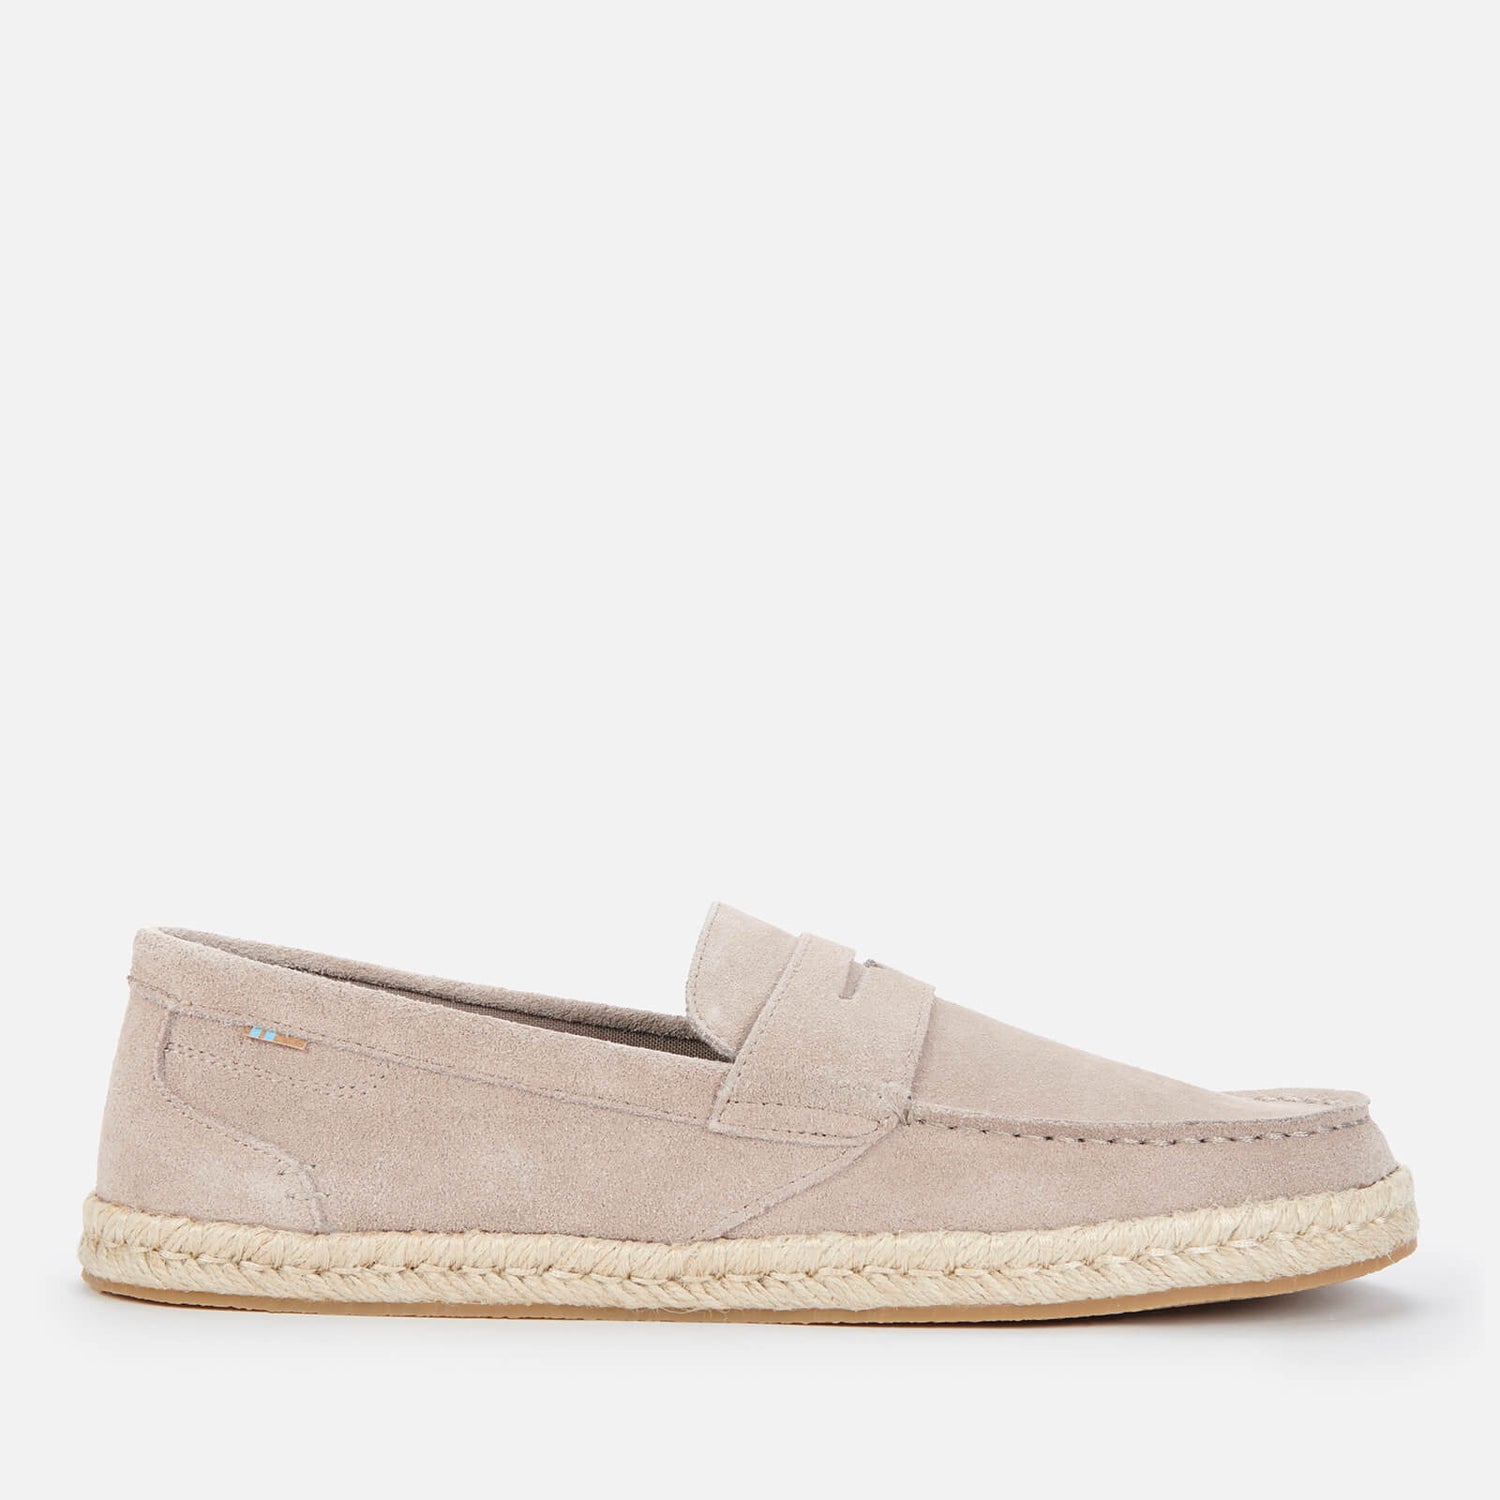 TOMS Men's Stanford Rope Suede Loafers - Desert Taupe | TheHut.com